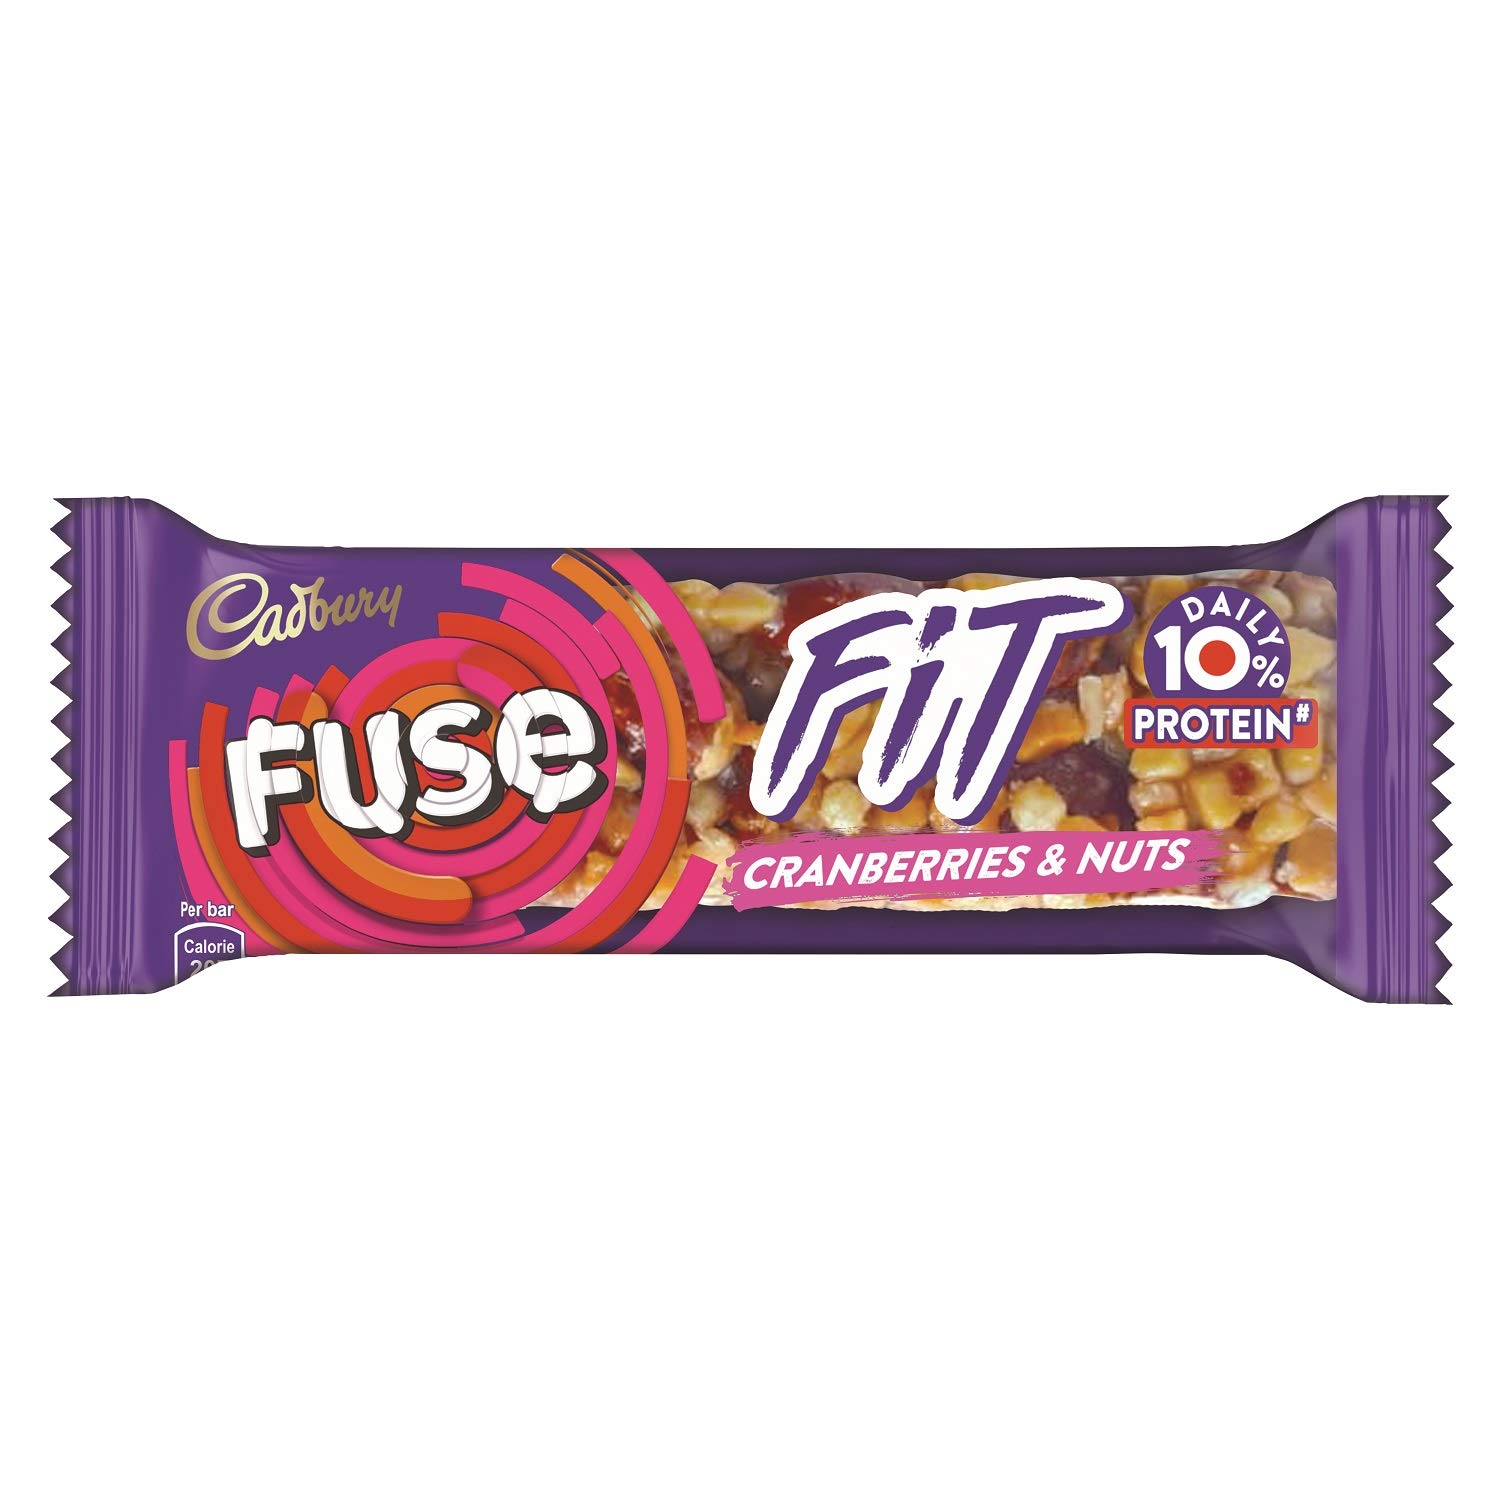 Cadbury Fuse Fit Snack Bar with Cranberries & Nuts Image